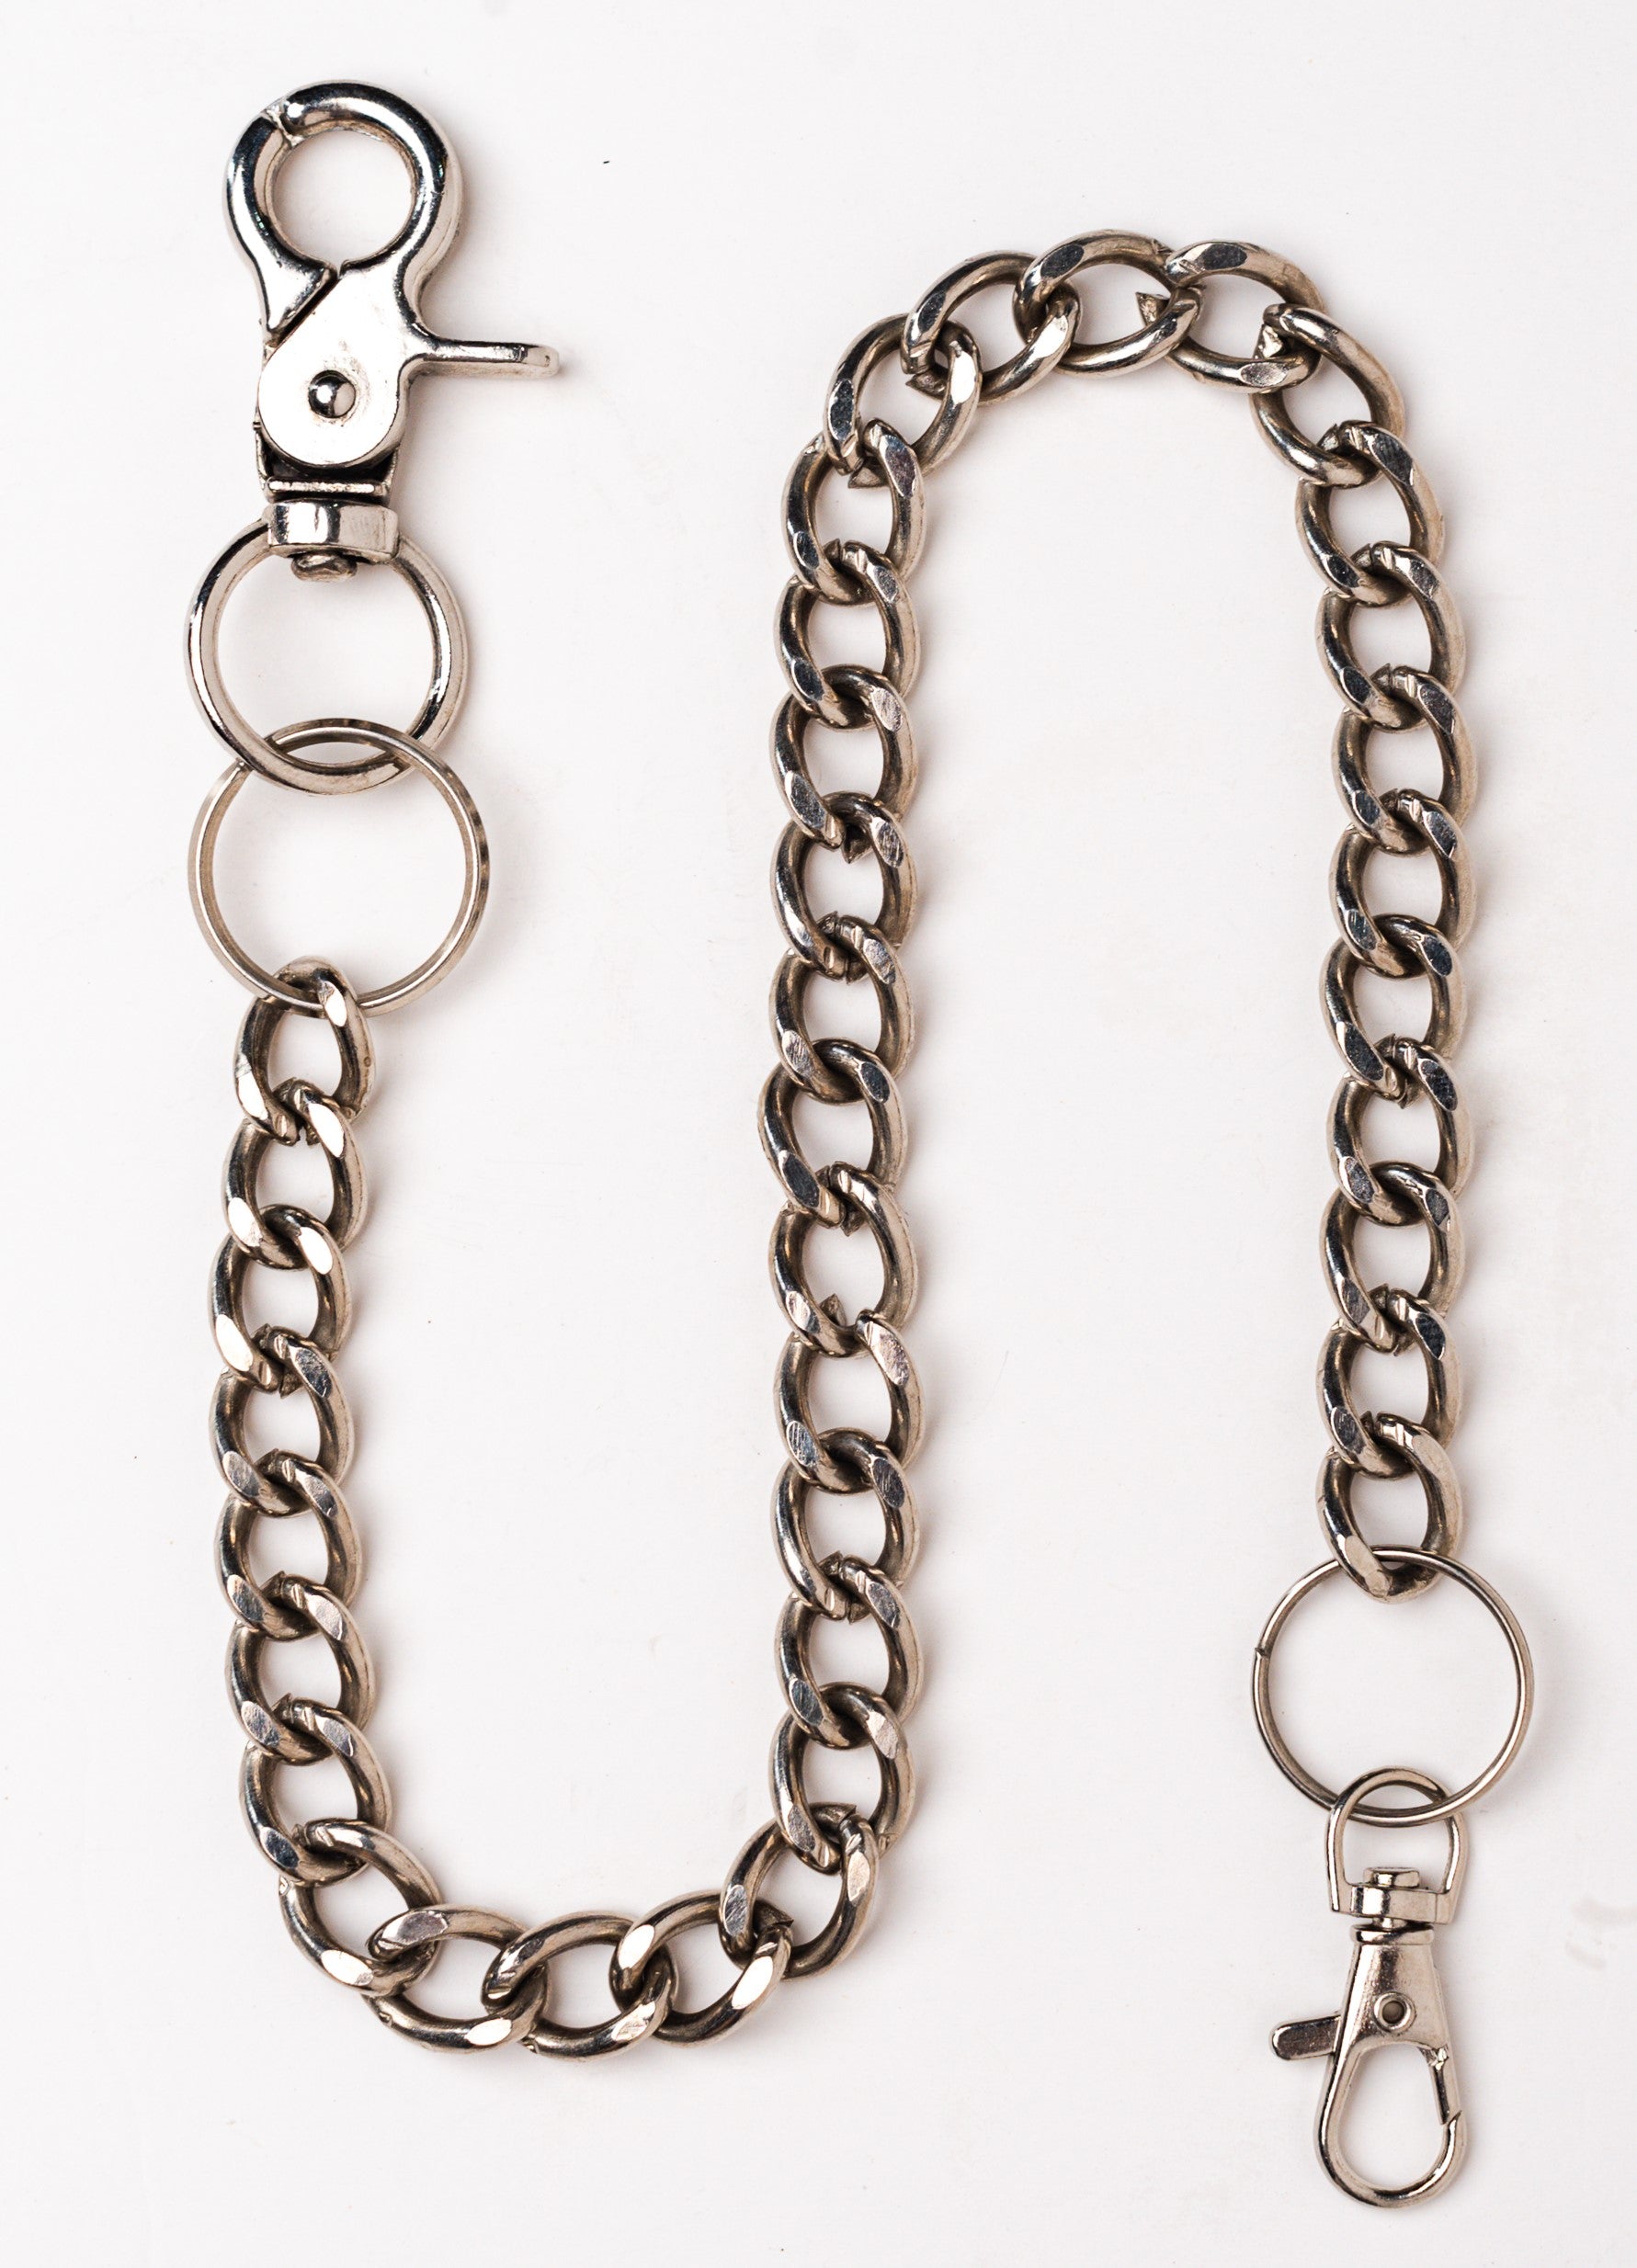 Replacement Chain for Men 20' inch long Pant Chain, Key Ring Fit Bifol